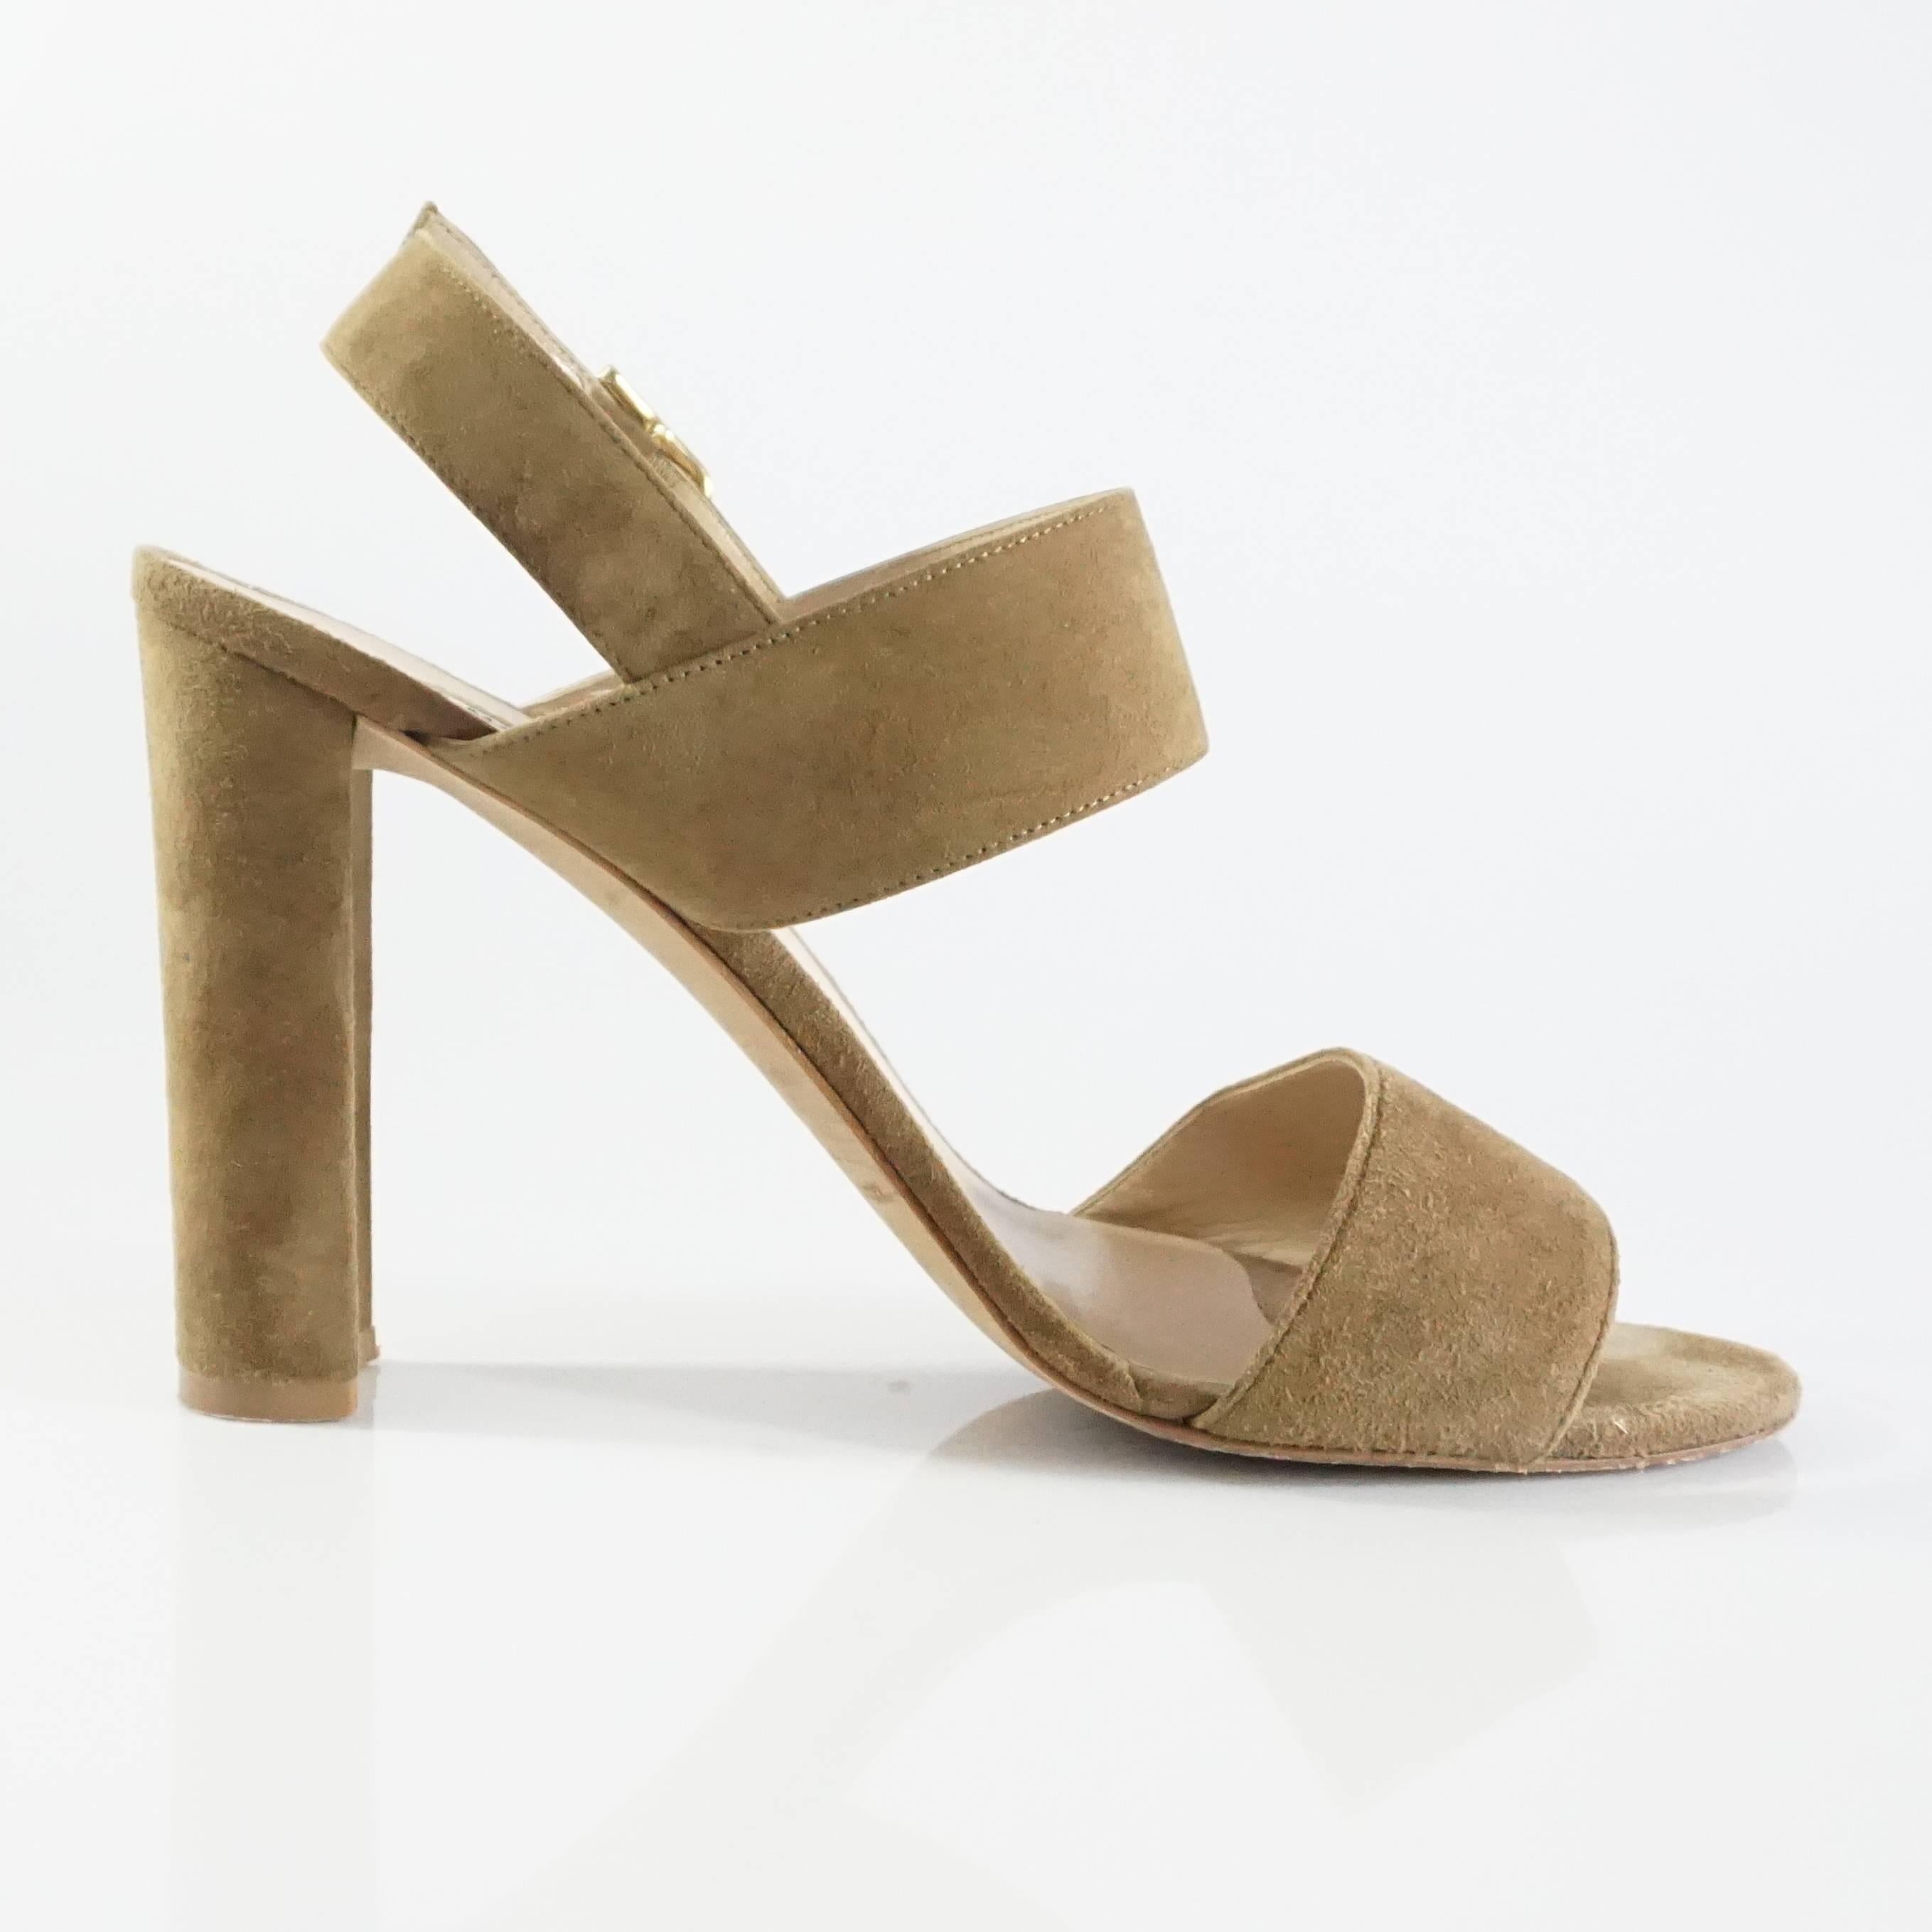 These Manolo Blahnik Khans sandals are taupe suede. They feature a strap over the toes, over the foot, and around the ankle. These shoes are in fair condition with marks in the toe bed, on the toe strap, and wear to the suede on the heels. Size